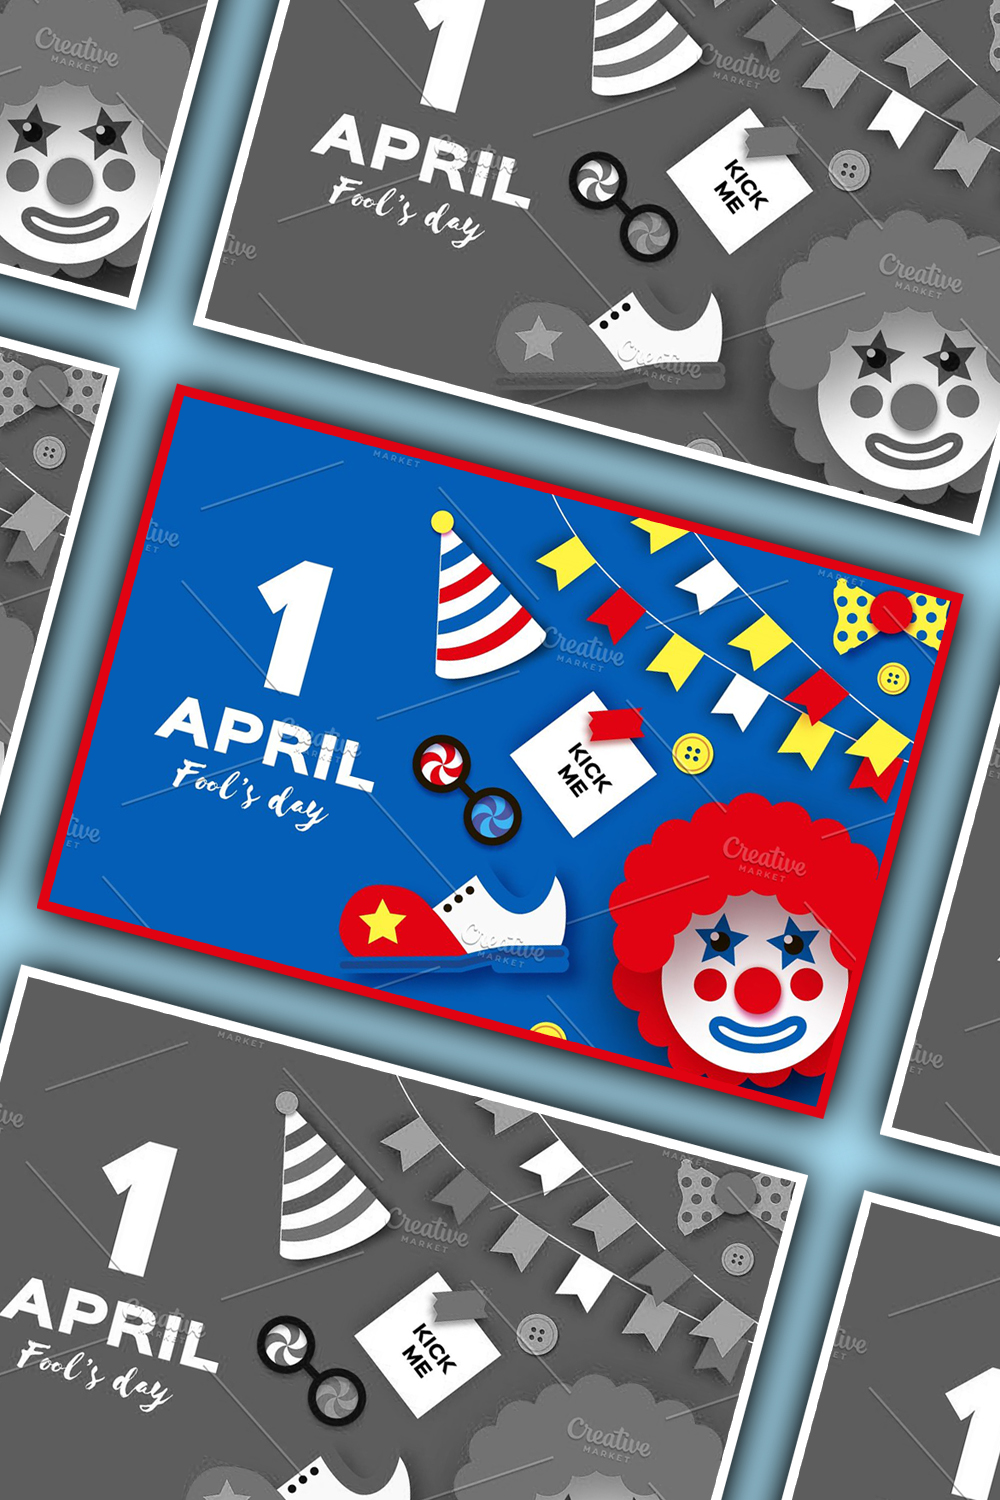 4613904 1 april fools day funny clown red pinterest 1000 1500 76